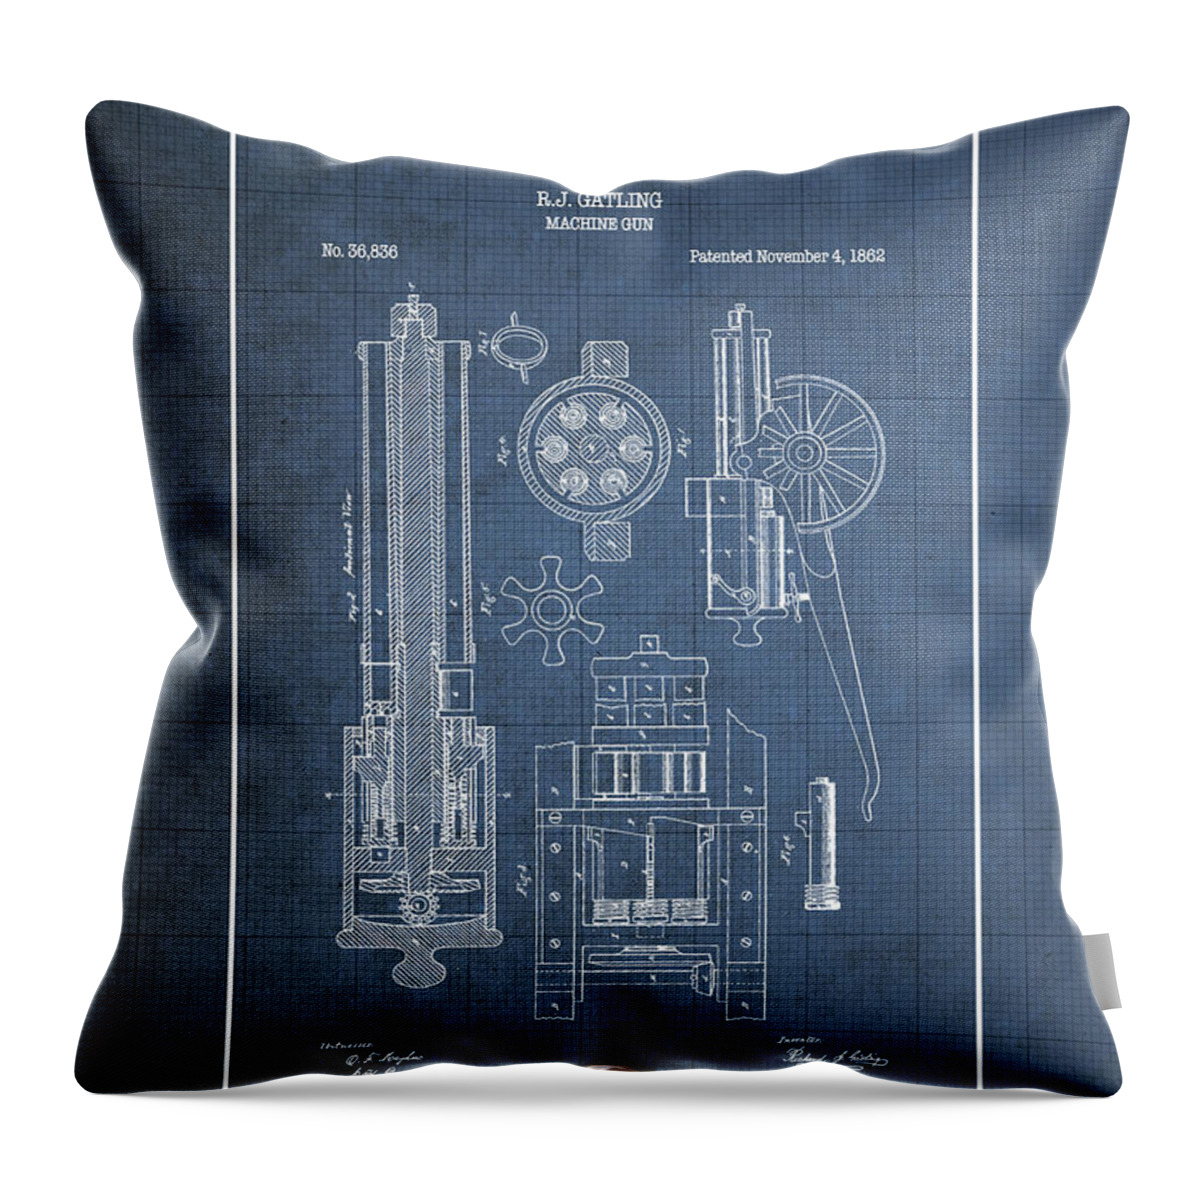 C7 Vintage Patents Weapons And Firearms Throw Pillow featuring the digital art Gatling Machine Gun - Vintage Patent Blueprint by Serge Averbukh